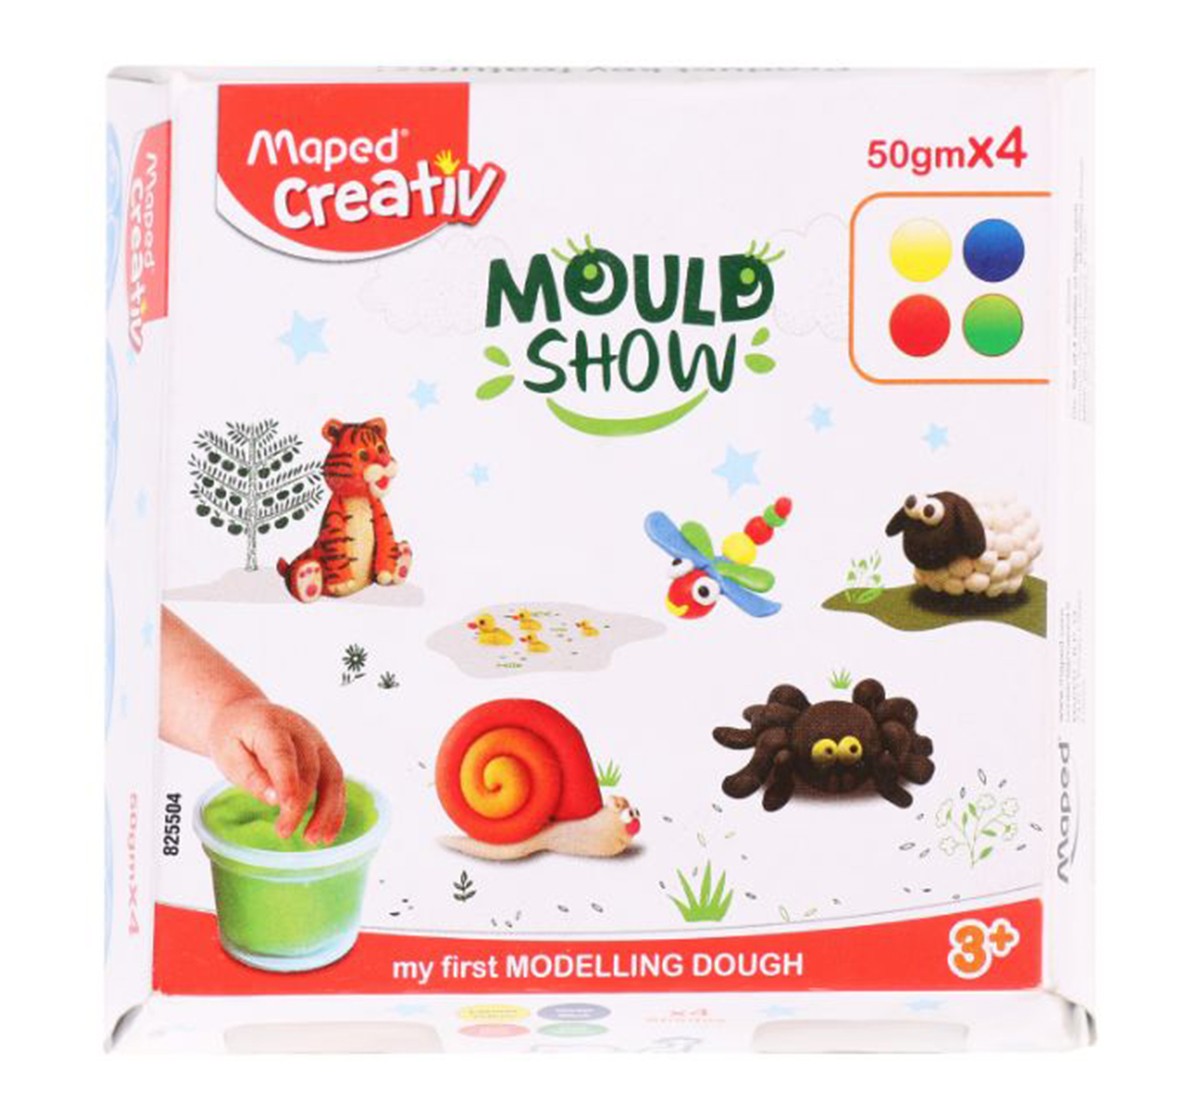 Maped Modelling Dough Pack of 4, 7Y+ (Multicolour)